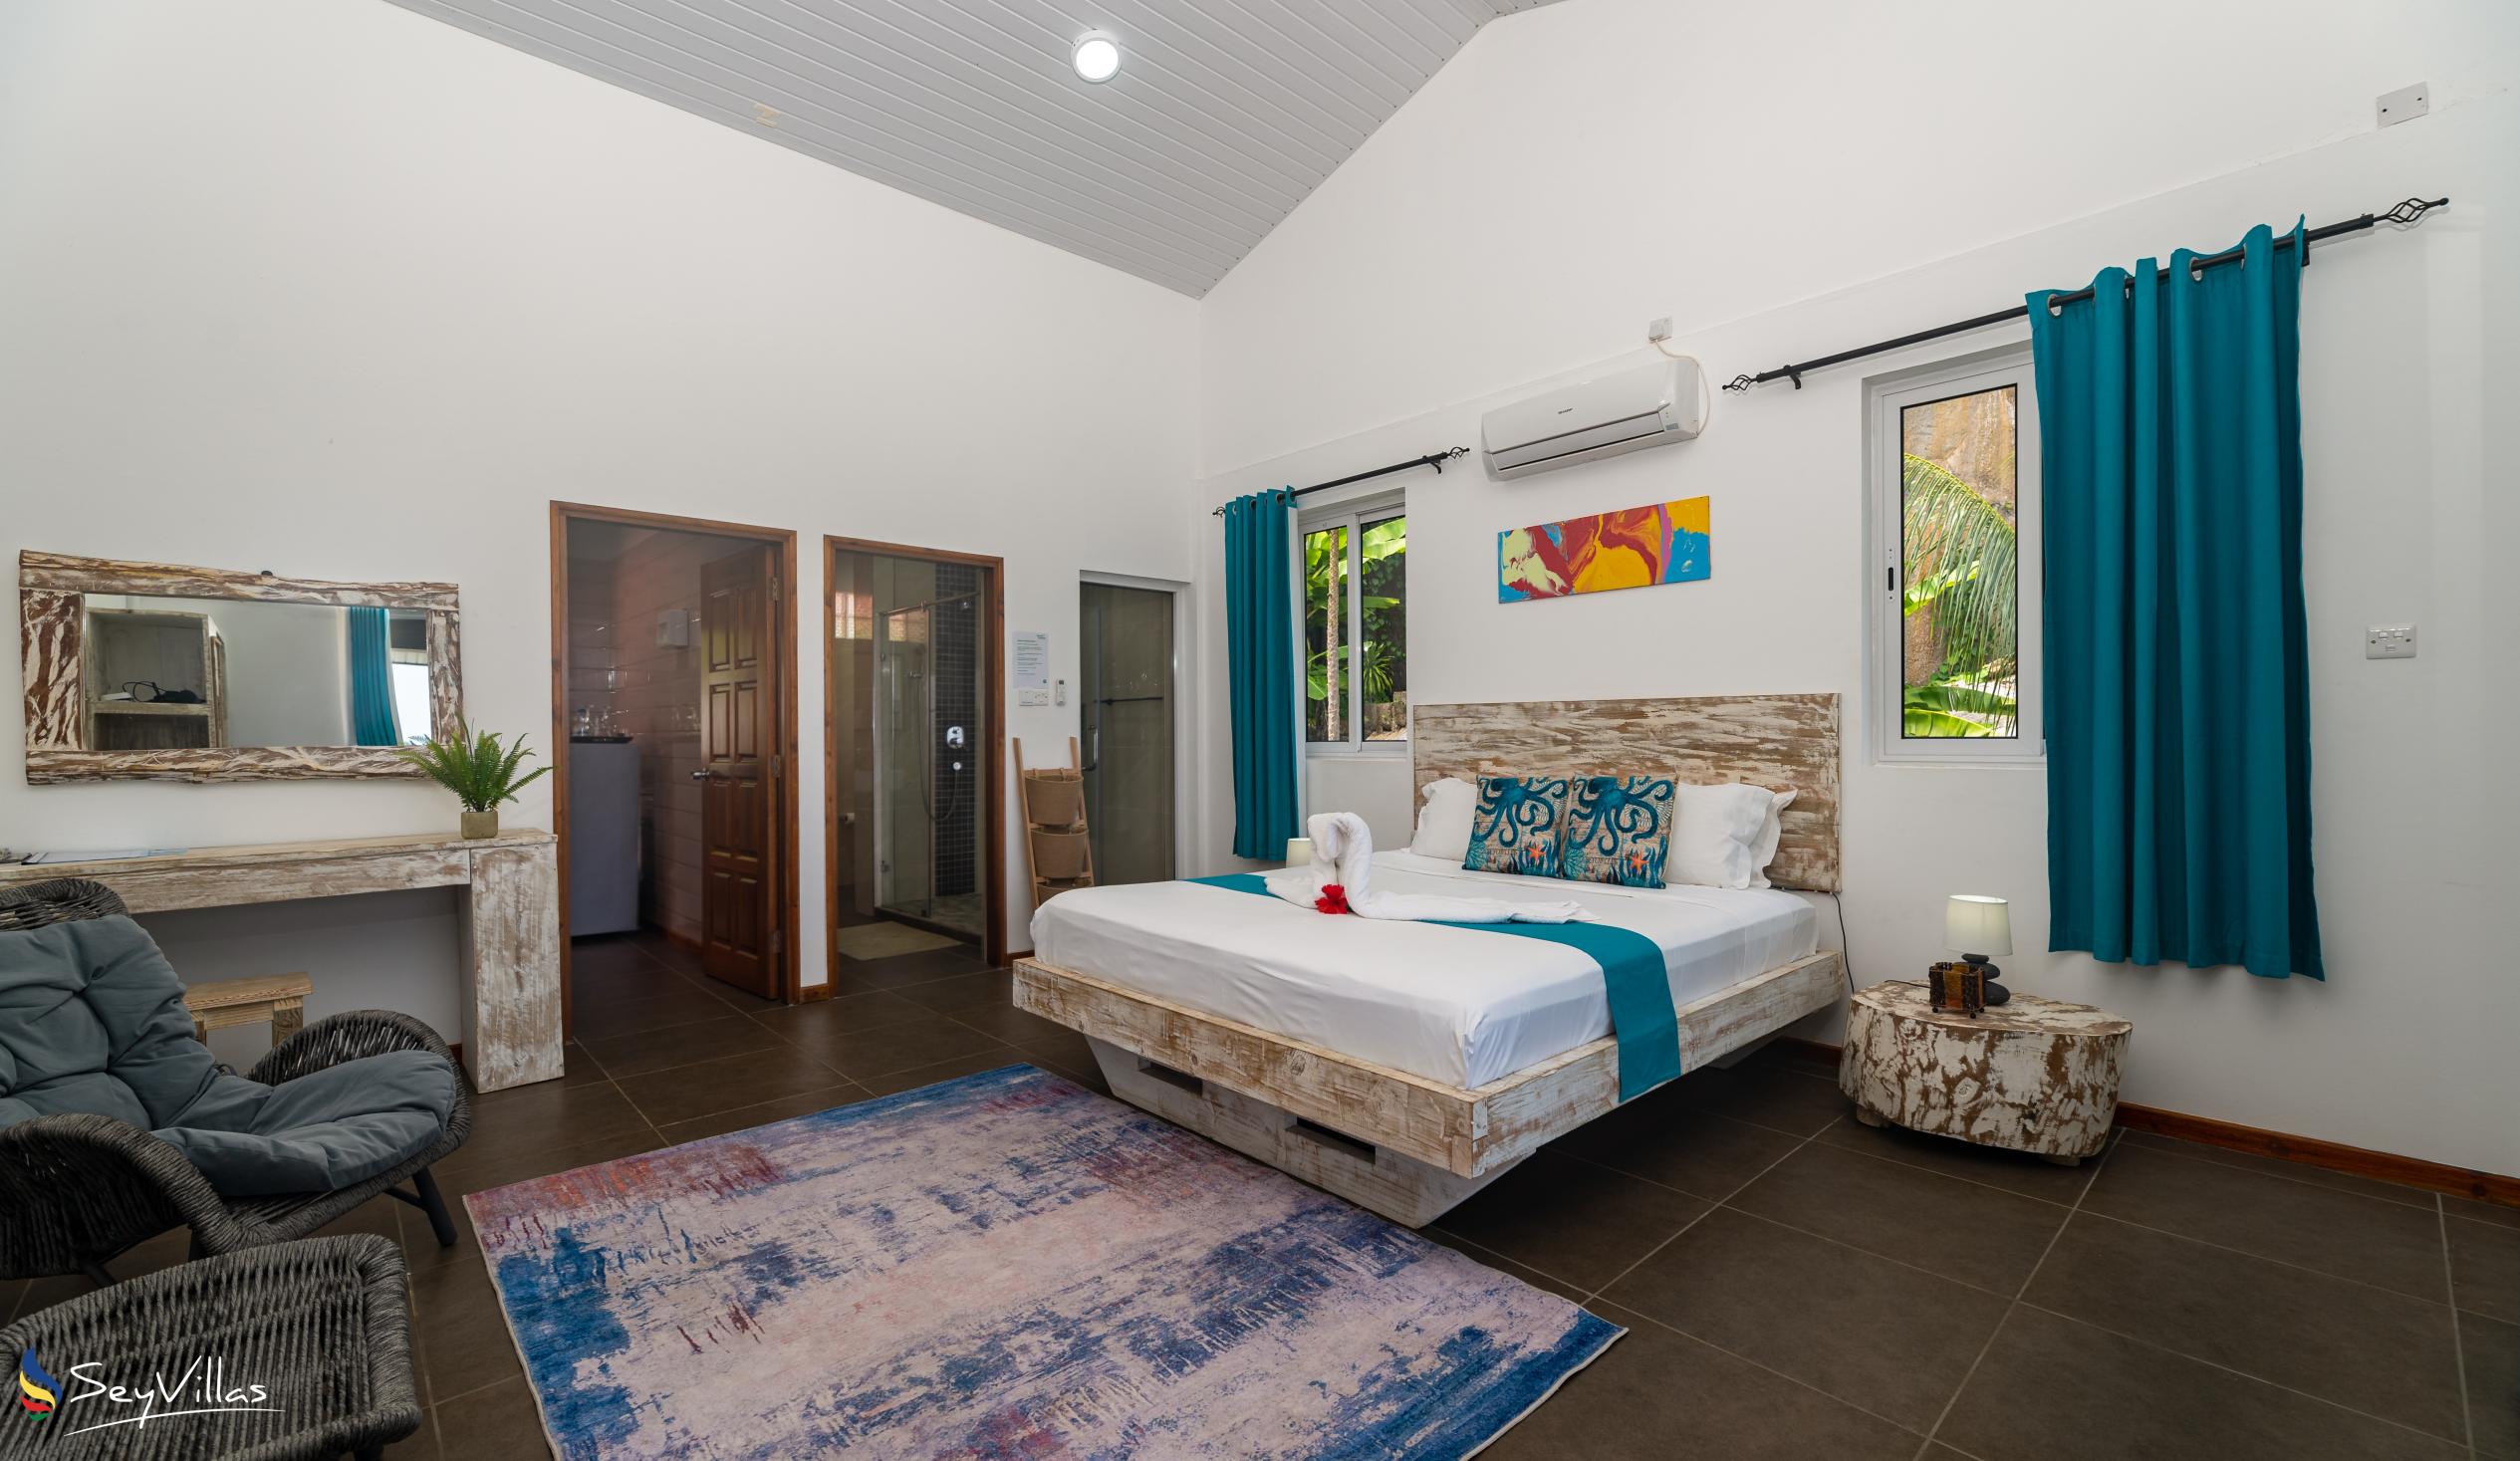 Foto 46: Auguste Holiday Residence - Appartement 1 chambre - Mahé (Seychelles)